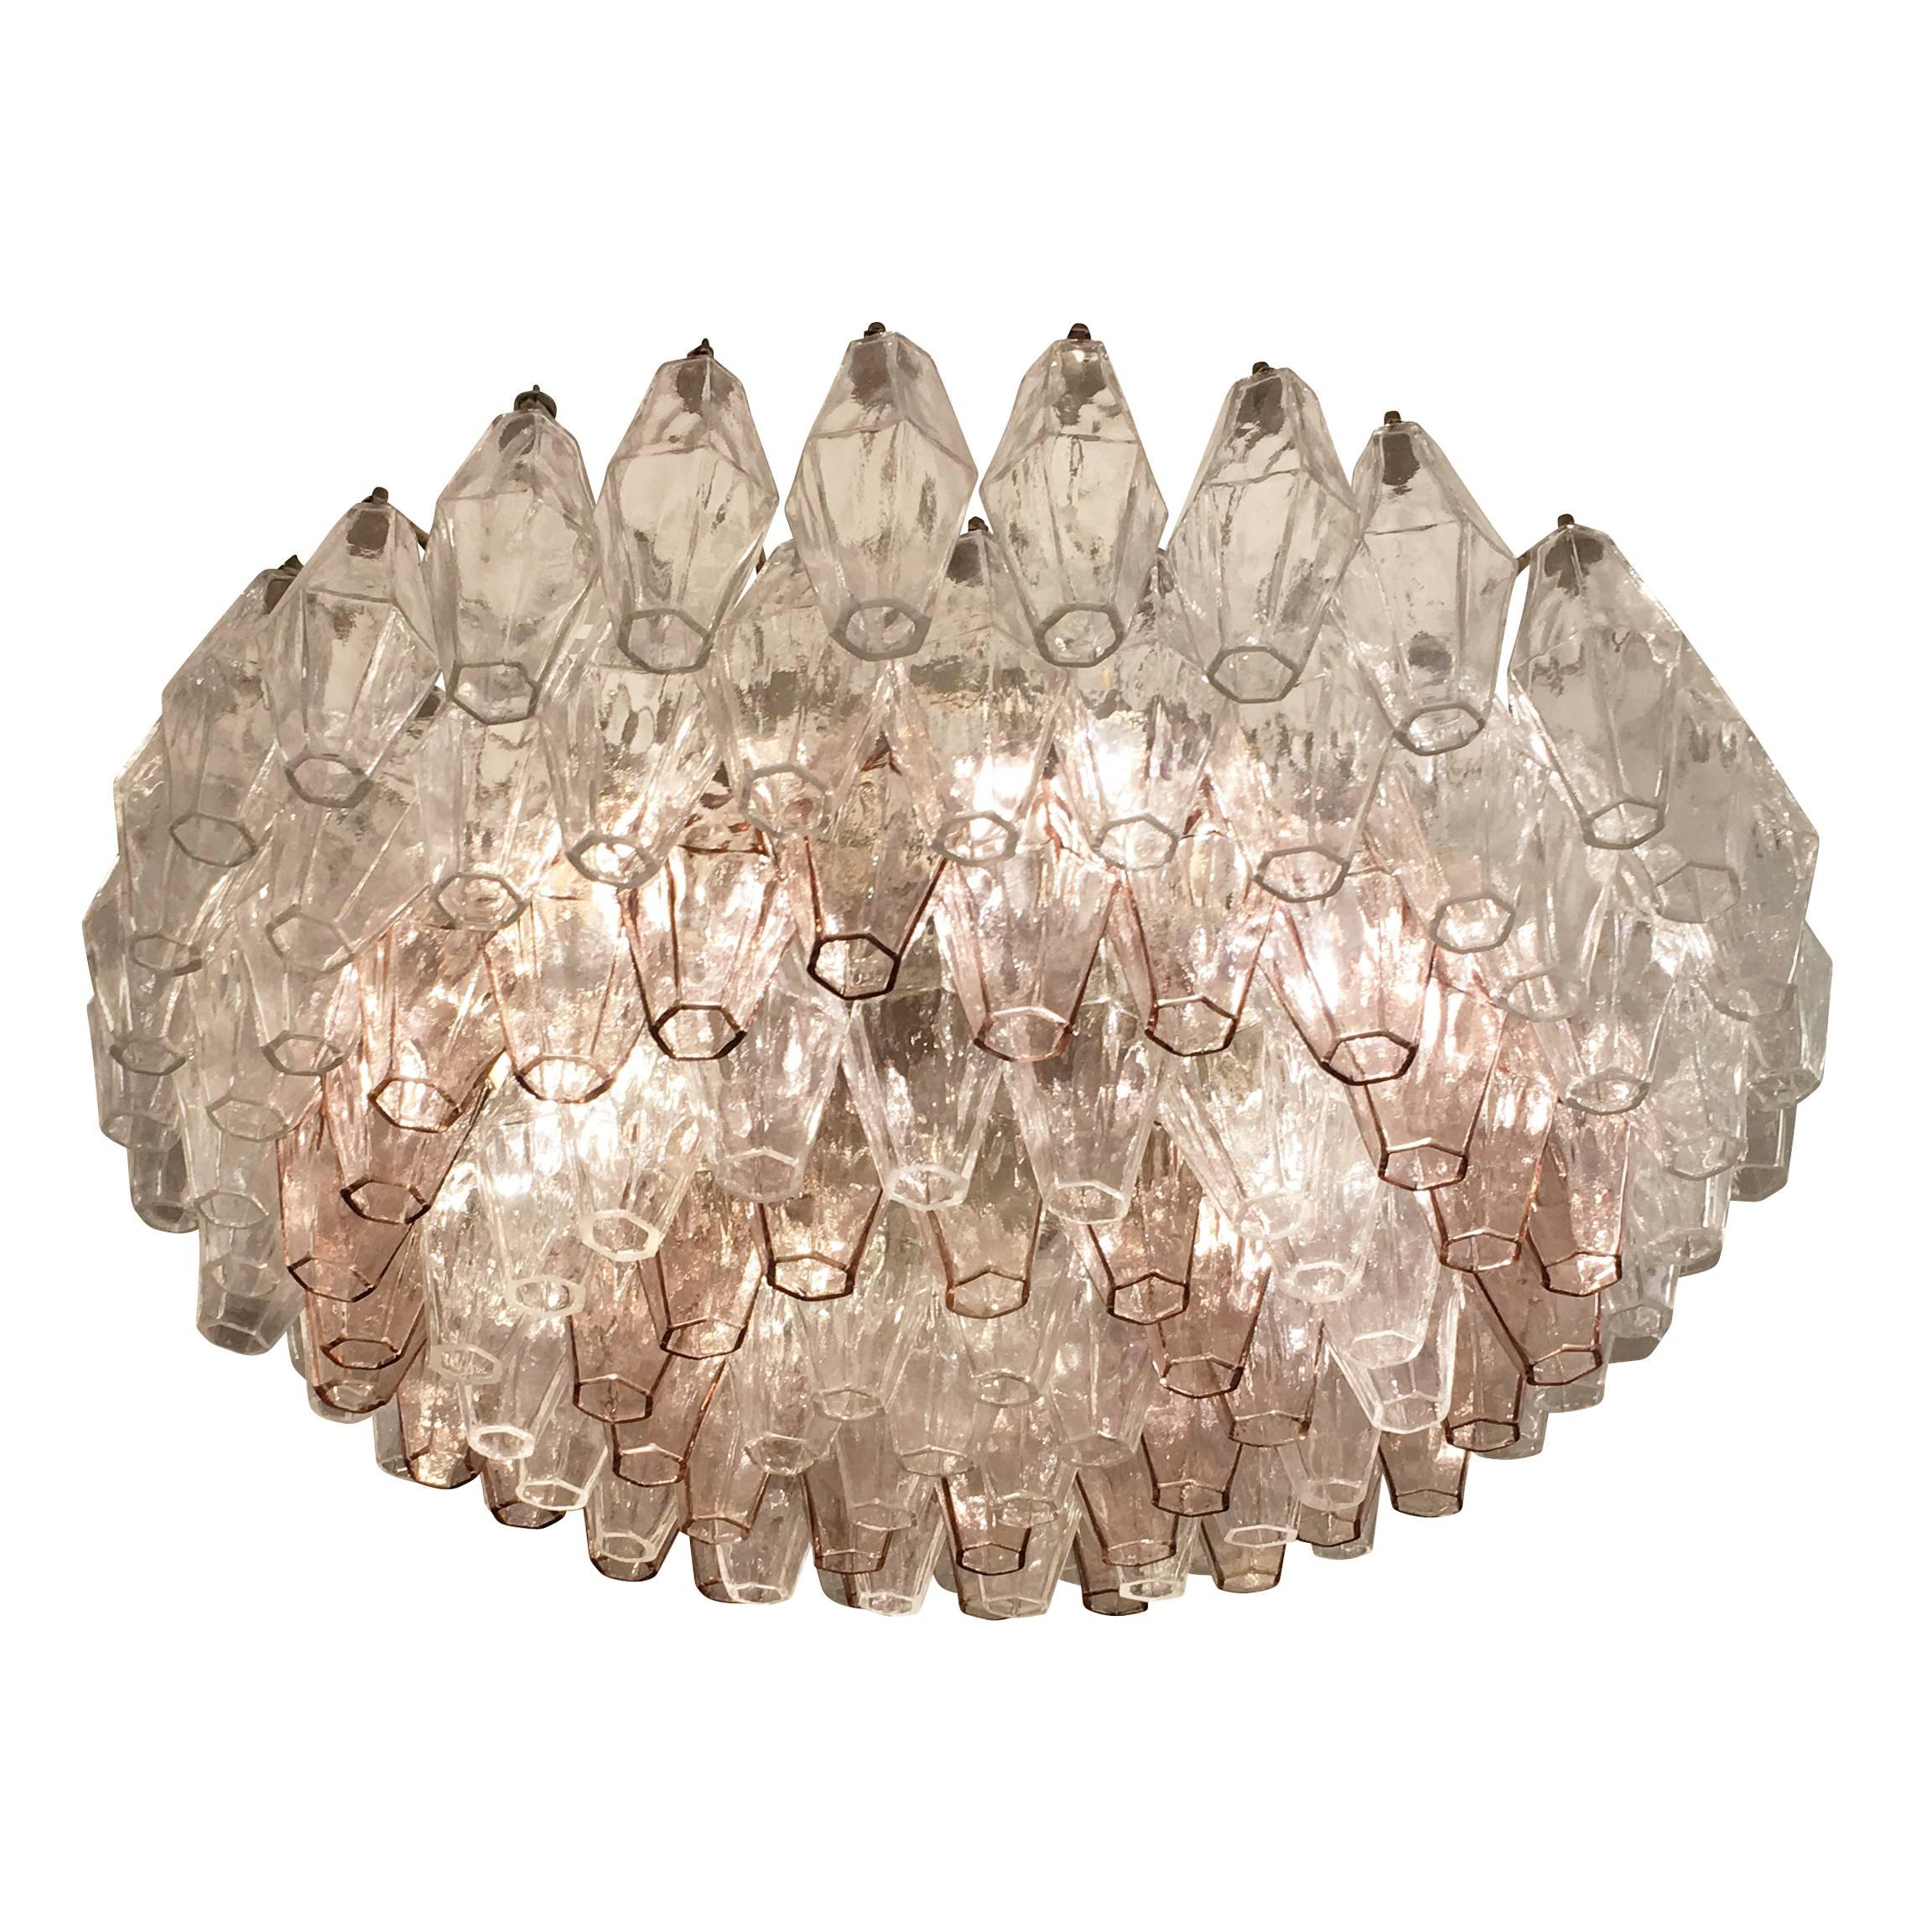 Original polyhedral chandelier made by Venini in the 1960s. This timeless Murano fixture has alternating rows of clear and light pink glasses on an off-white frame. Additional clear poliedri are available if needed. Can be semi-flush mounted or hung